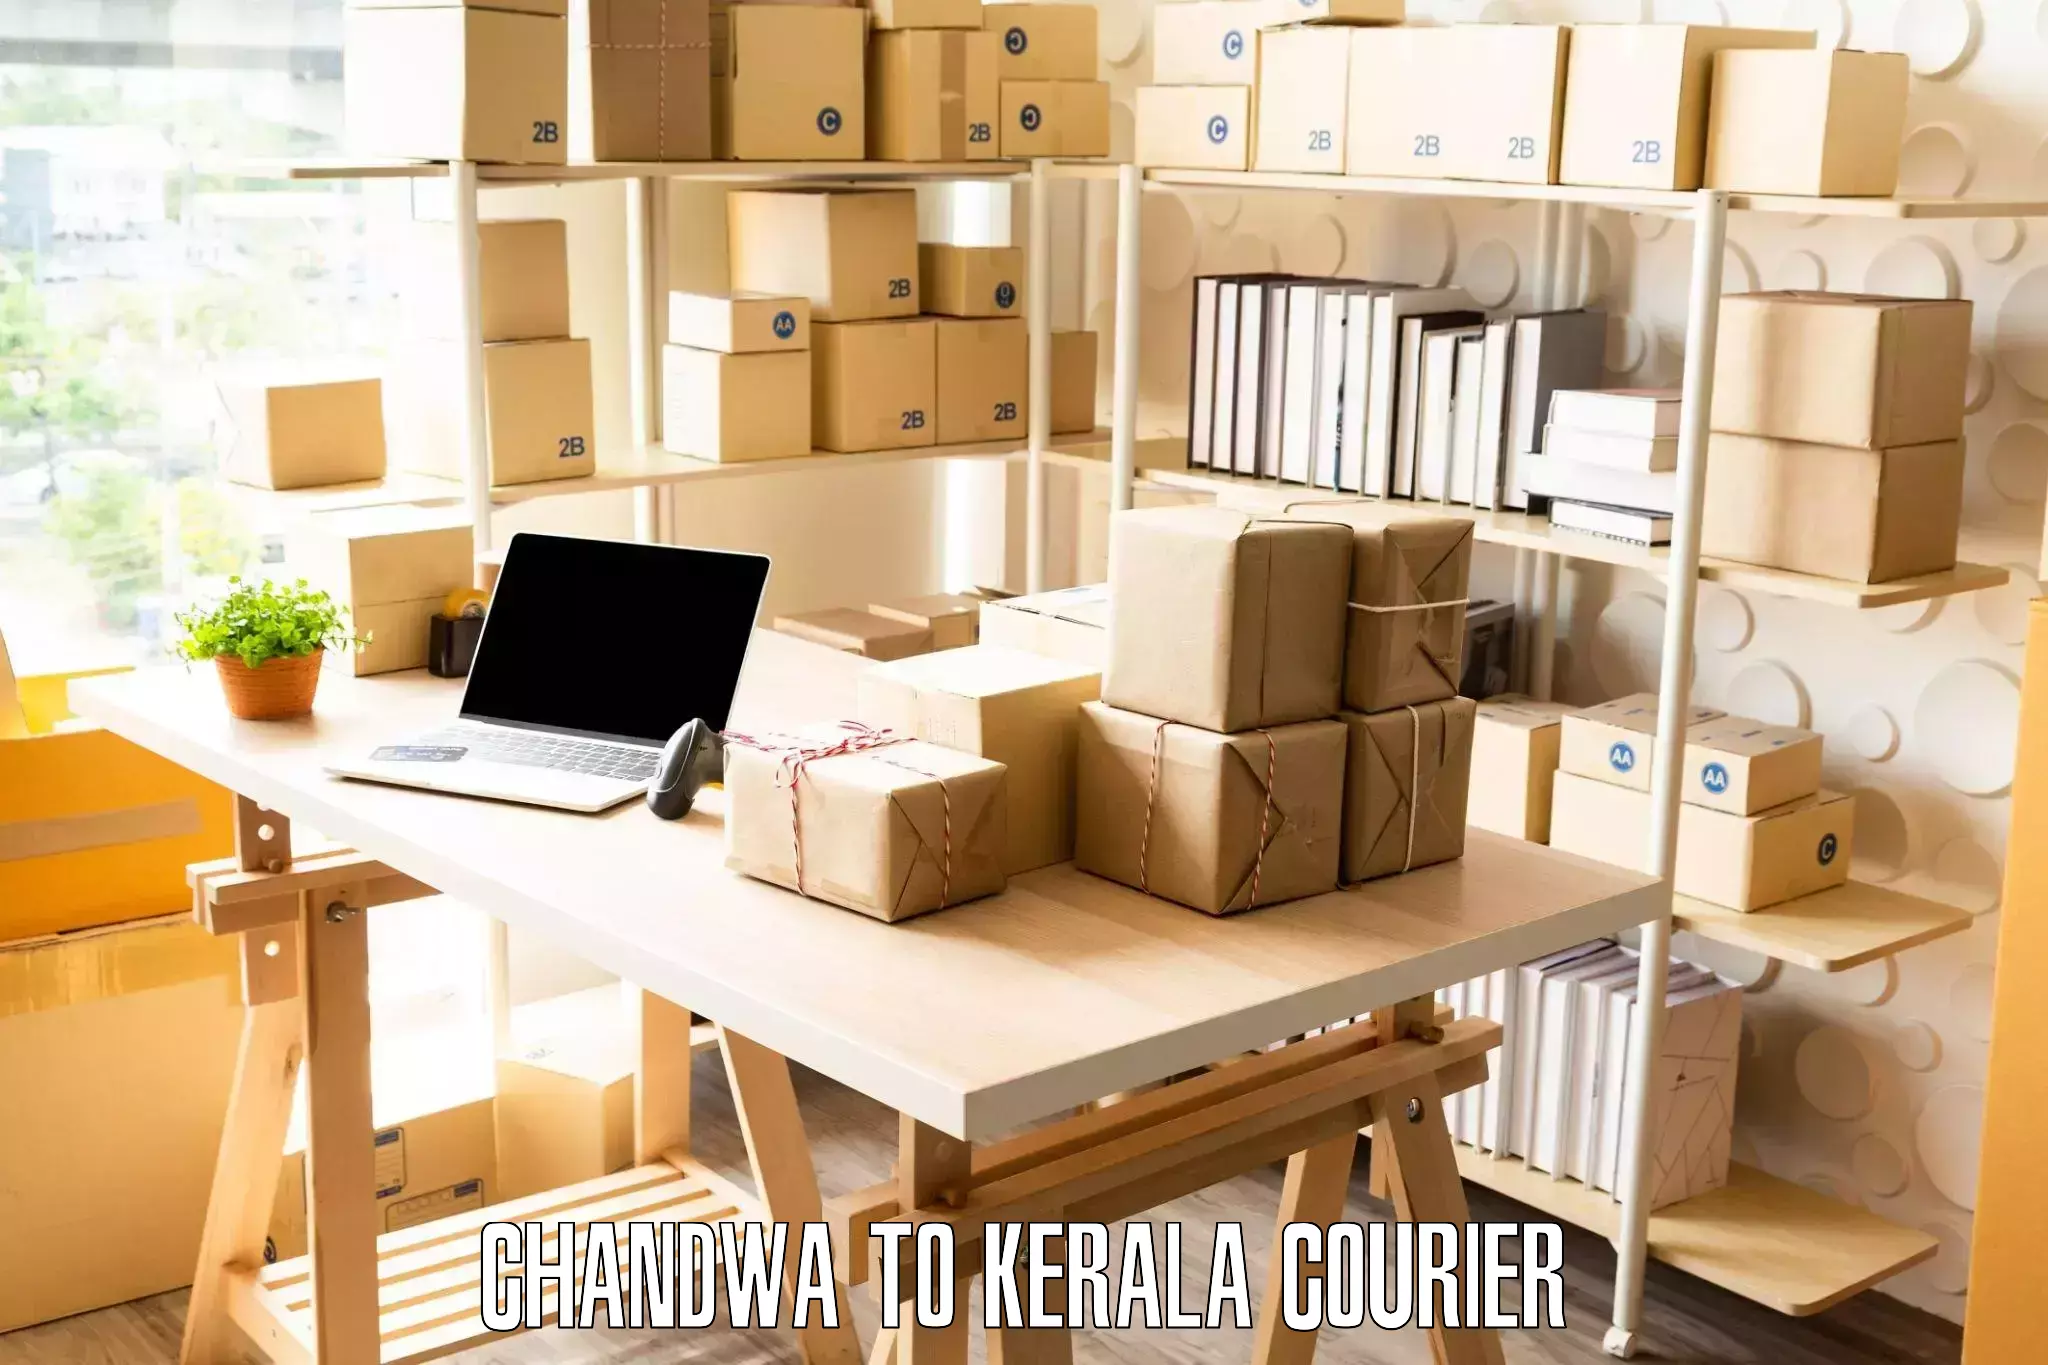 Reliable relocation services Chandwa to Kerala